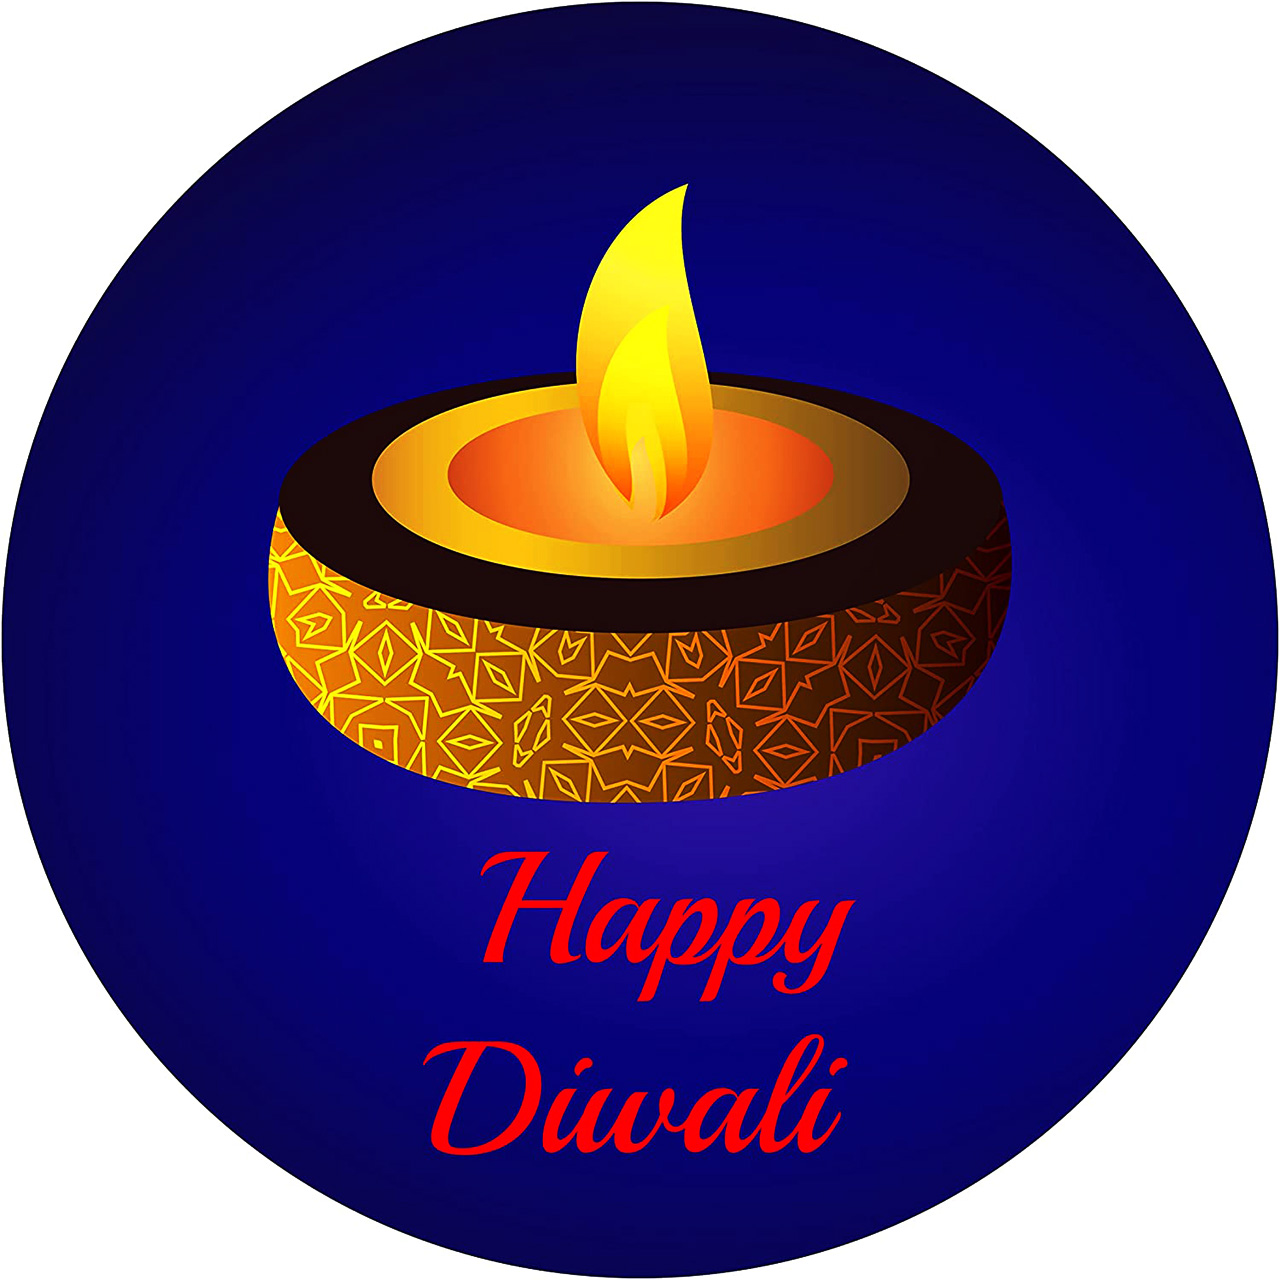 DIWALI STICKERS IDEAL FOR GIFT WRAPPING | DIWALI STICKERS FOR GIFT BAG | HAPPY DIWALI VINYL STICKER